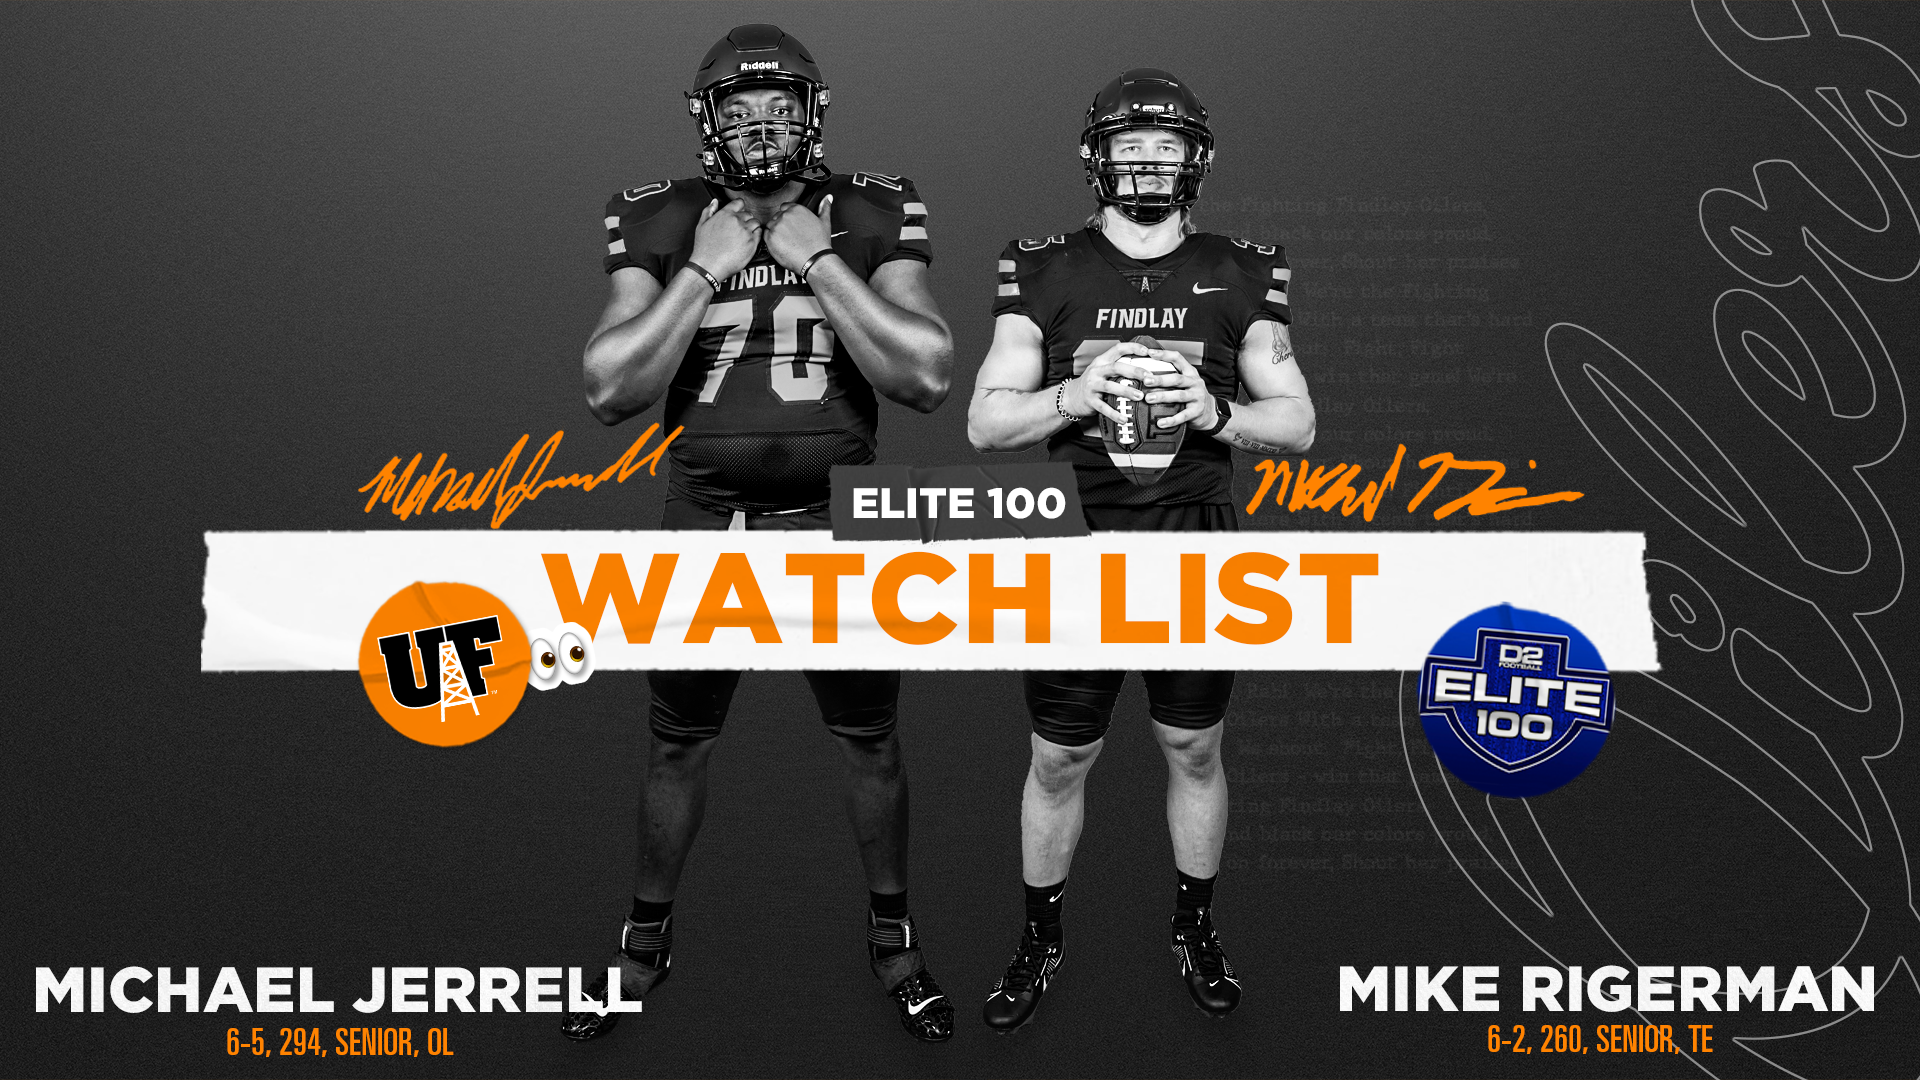 Jerrell and Rigerman Named to D2Football.com Elite 100 Watch List